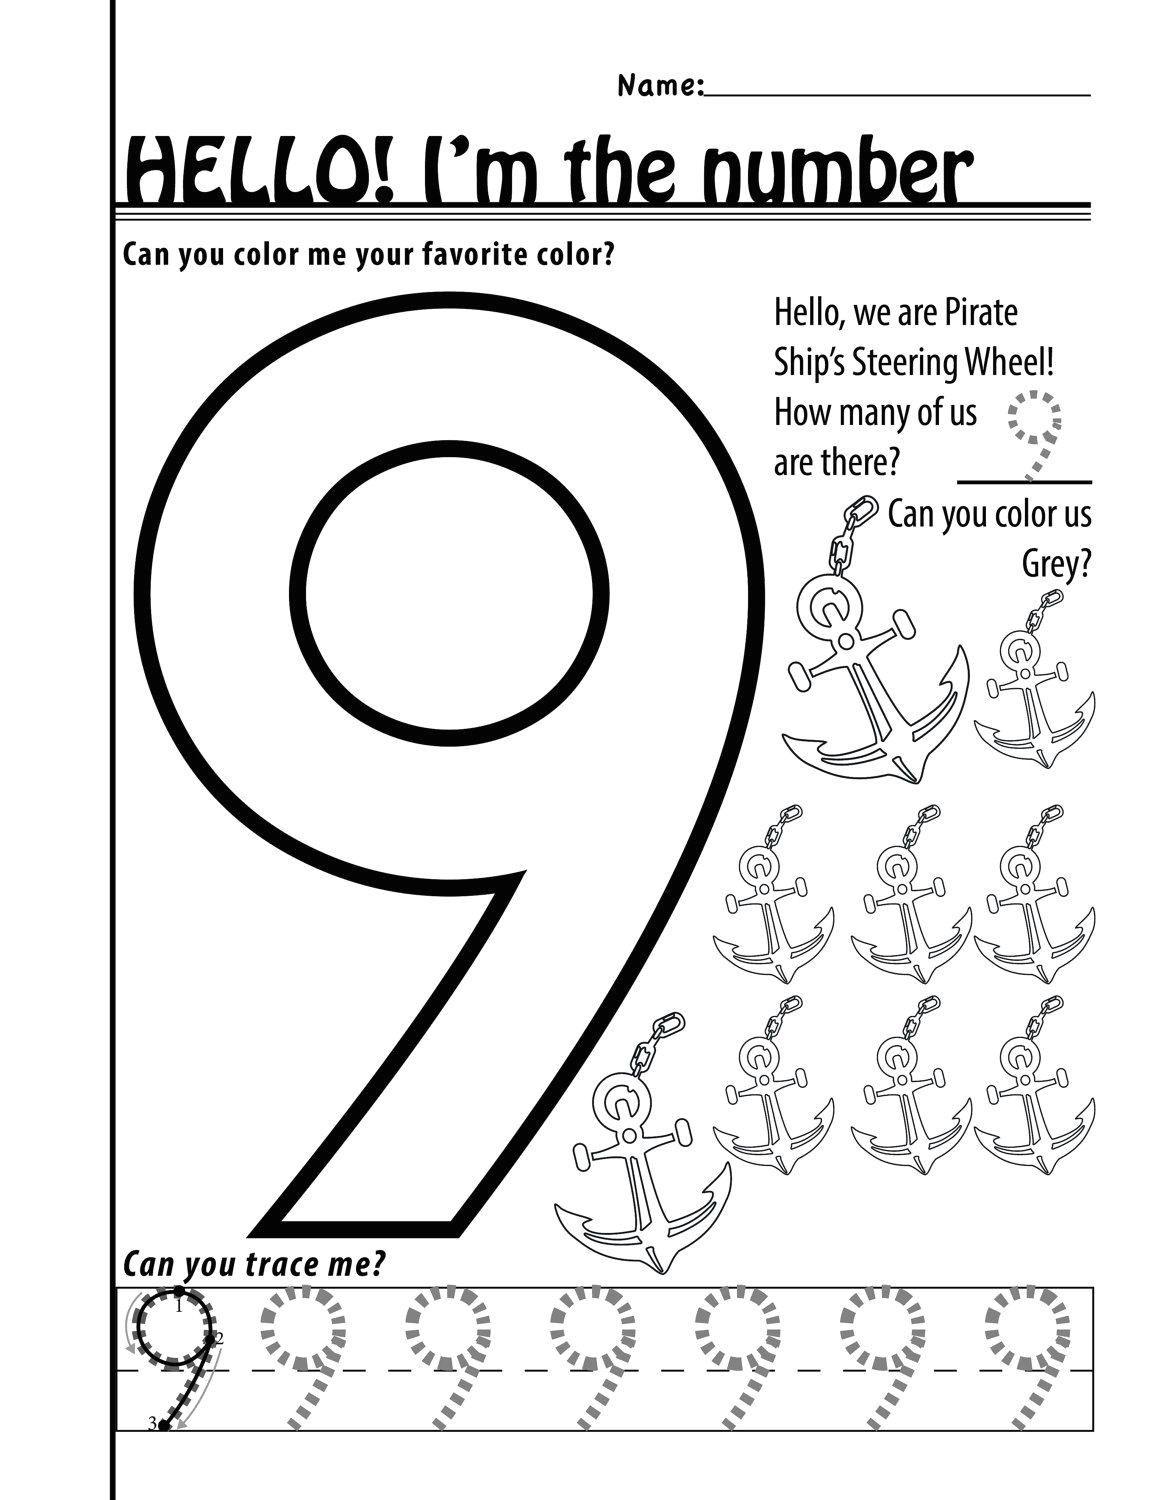 Number 9 Drawing Number 9 Worksheets 11 Pages by Designsbylizperkins On Etsy My